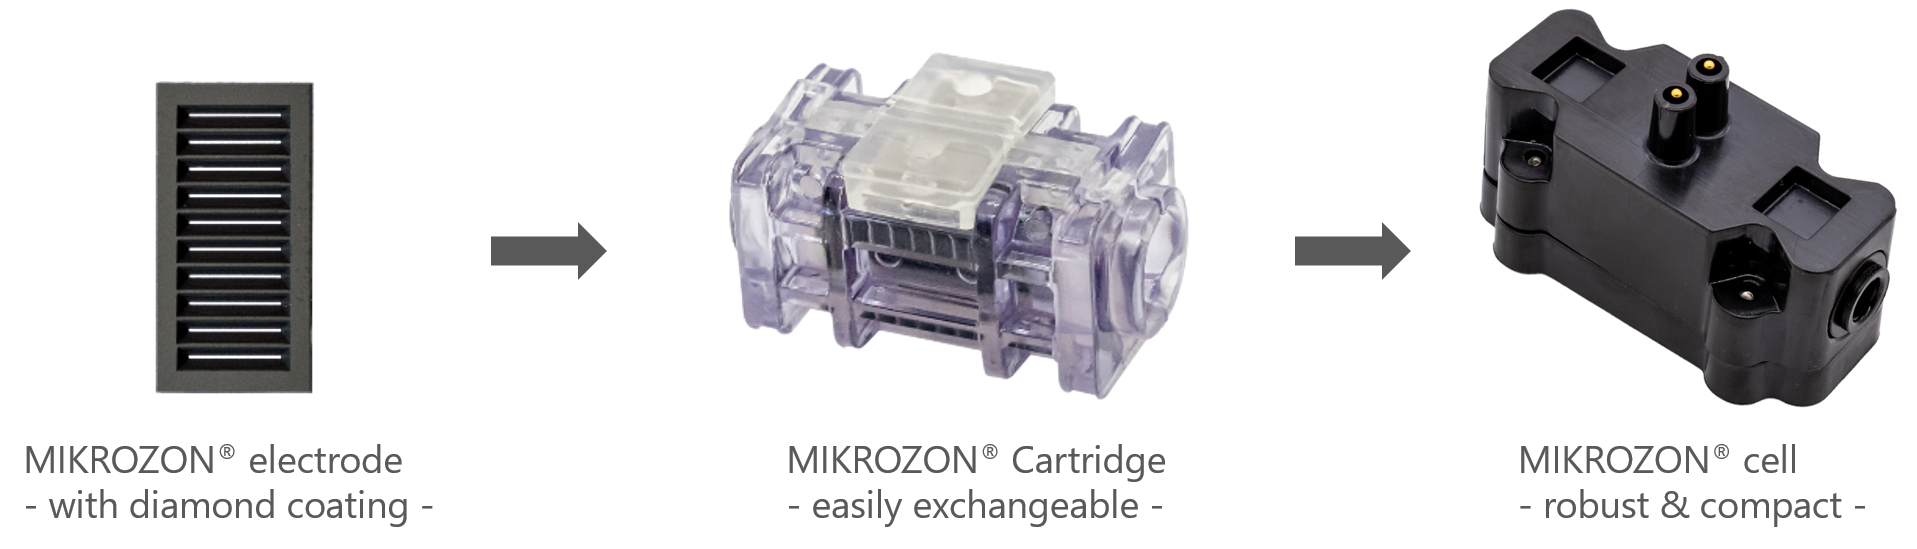 Composition of the MIKROZON® cell with exchangeable cartridge and diamond electrode